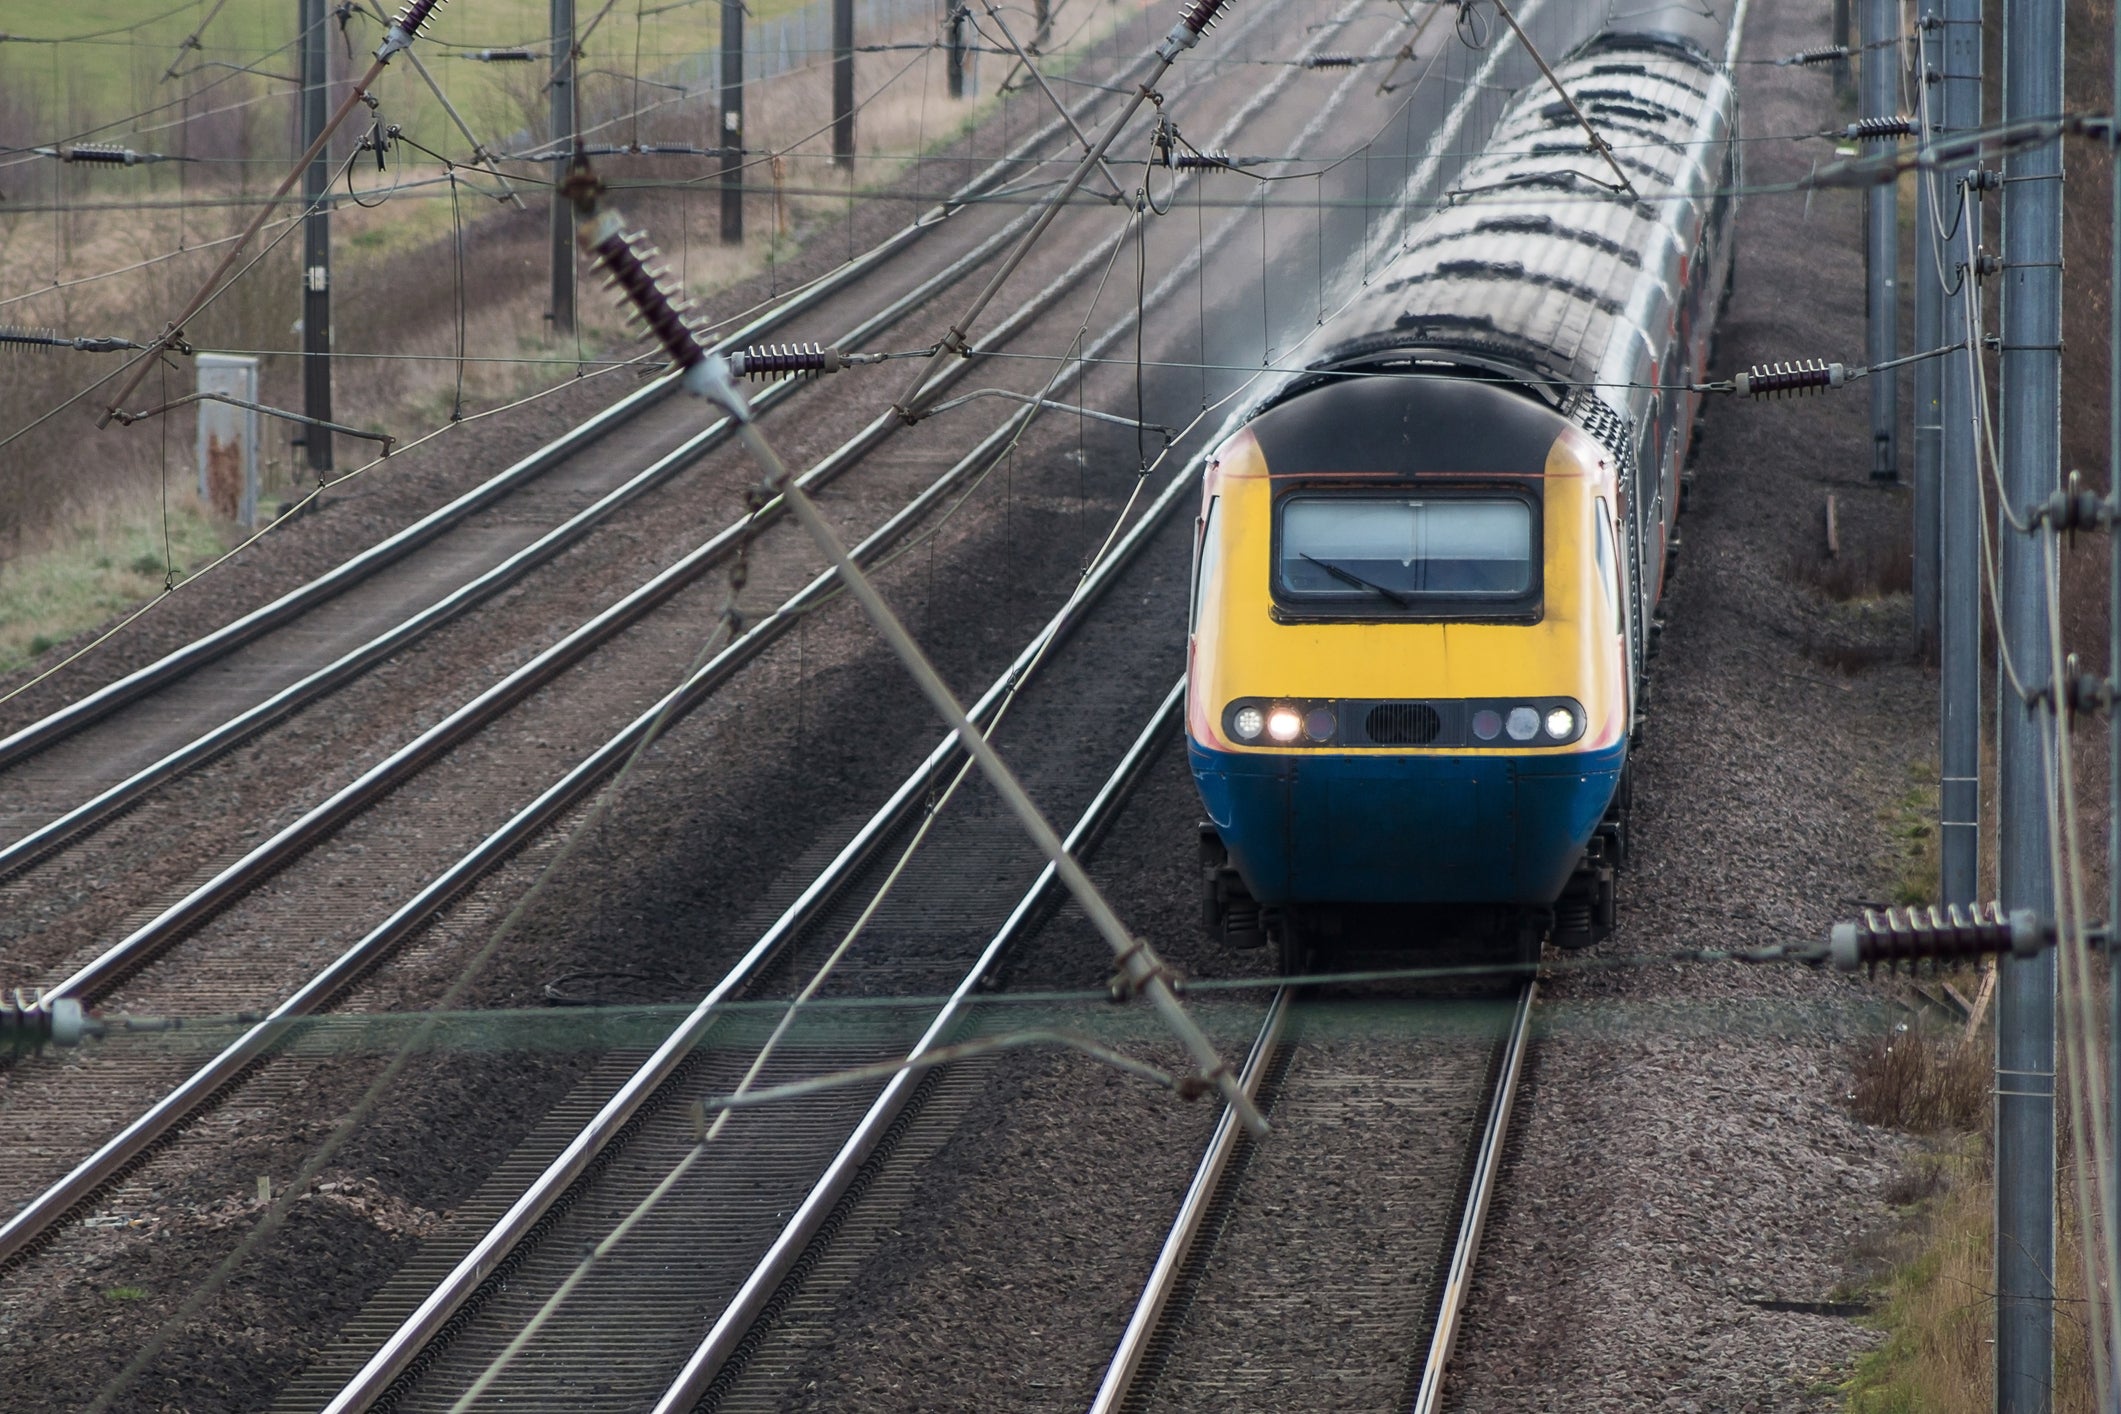 The midland mainline could be upgraded instead